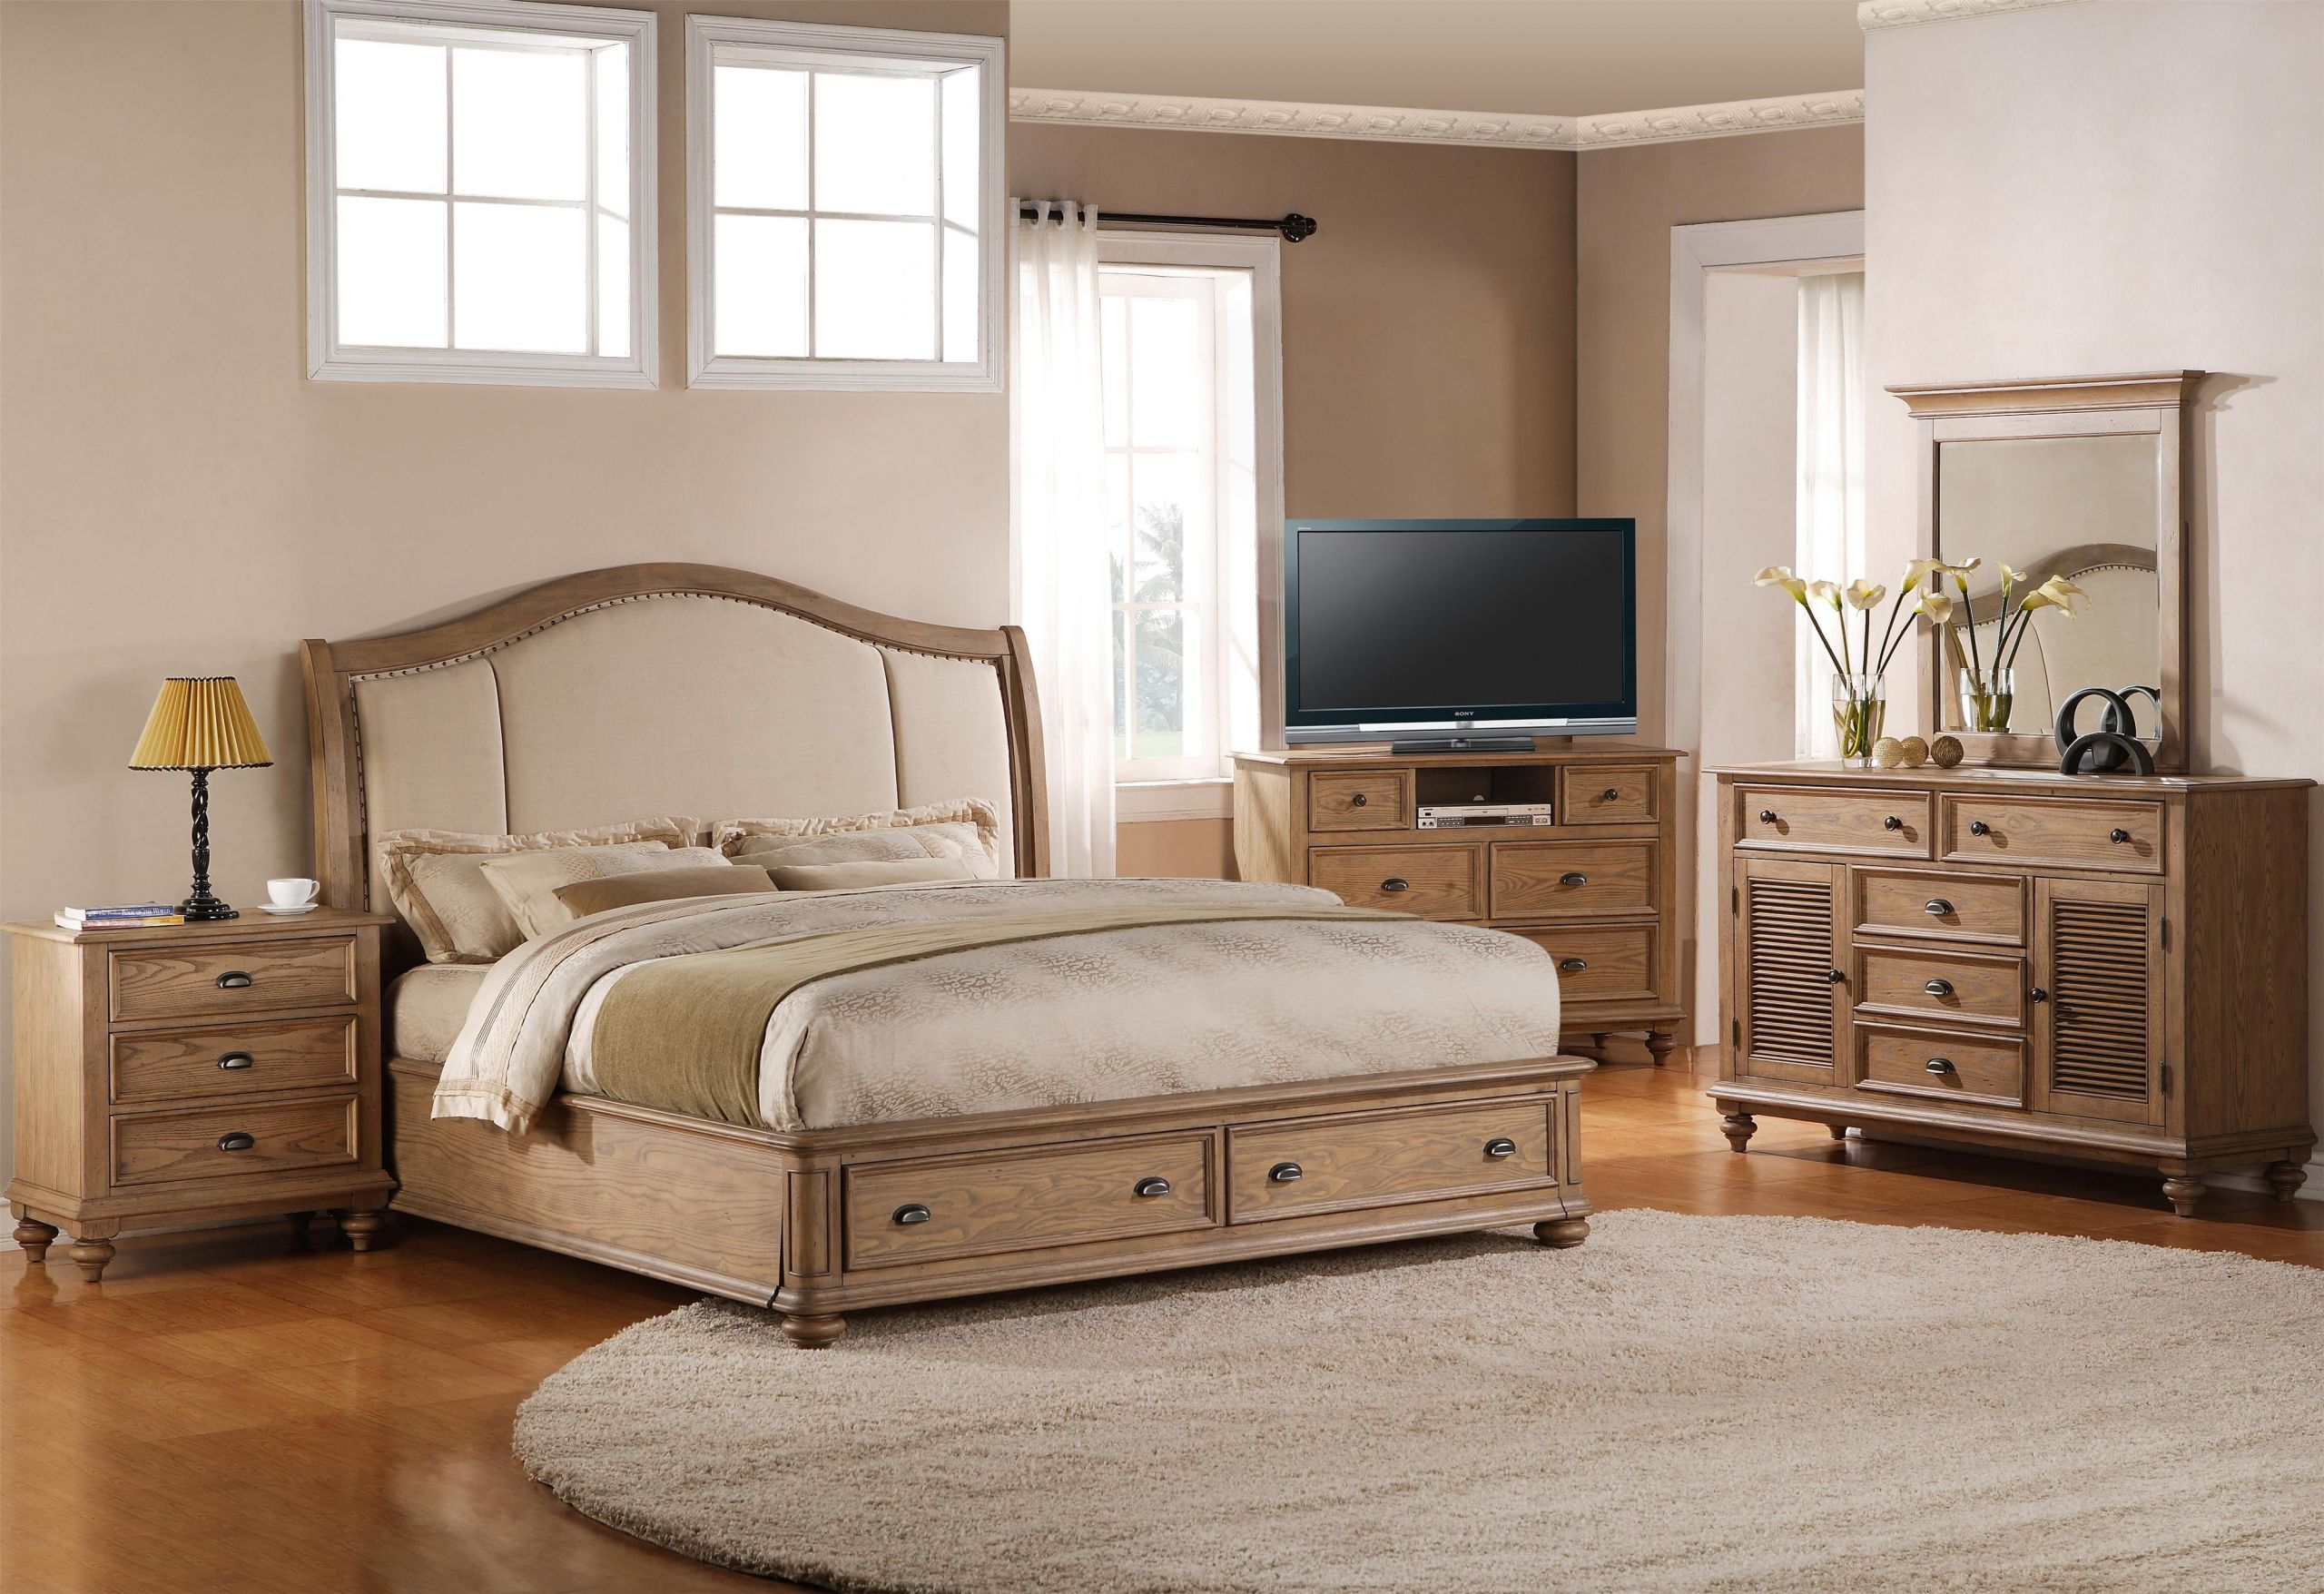 Storage Bed Bedroom Set
 Full Queen Upholstered Headboard Bed with Storage